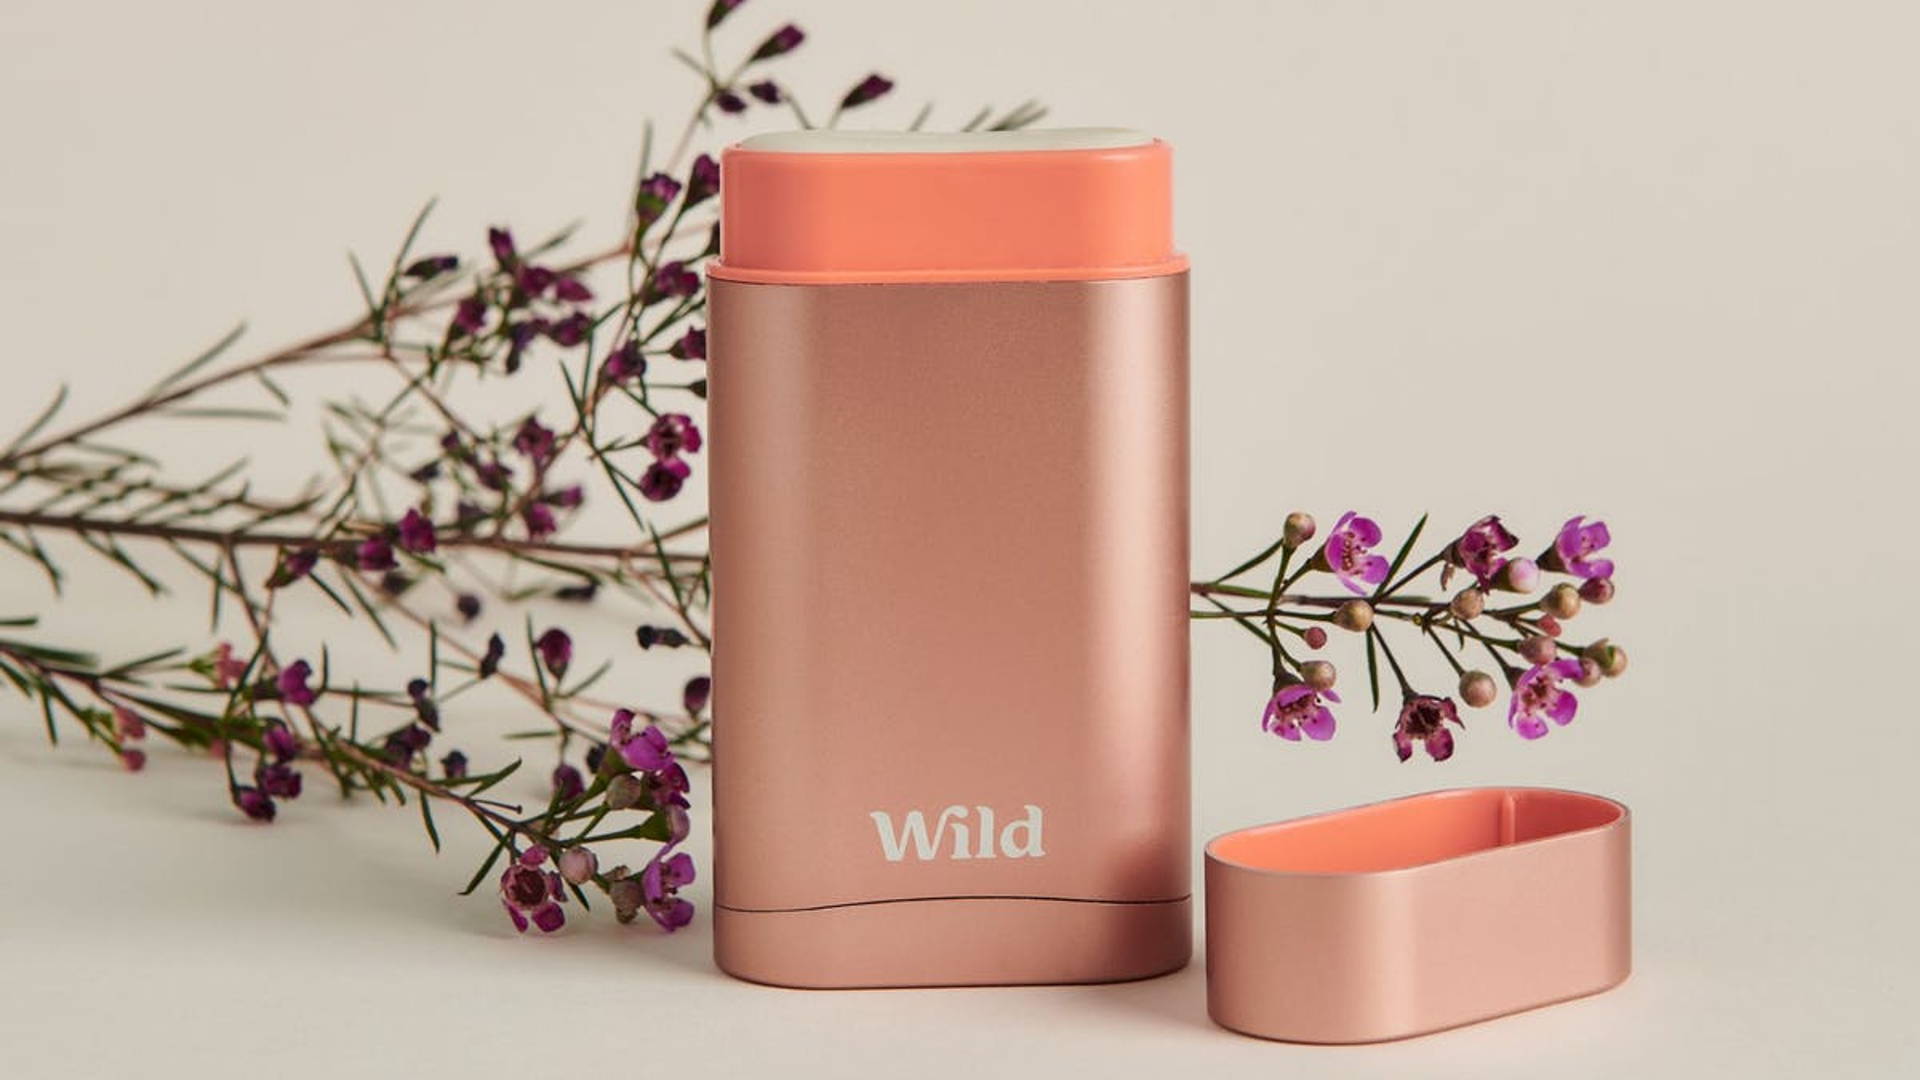 Wild Deodorant Will Ship You A Plastic-Free Refill  Dieline - Design,  Branding & Packaging Inspiration